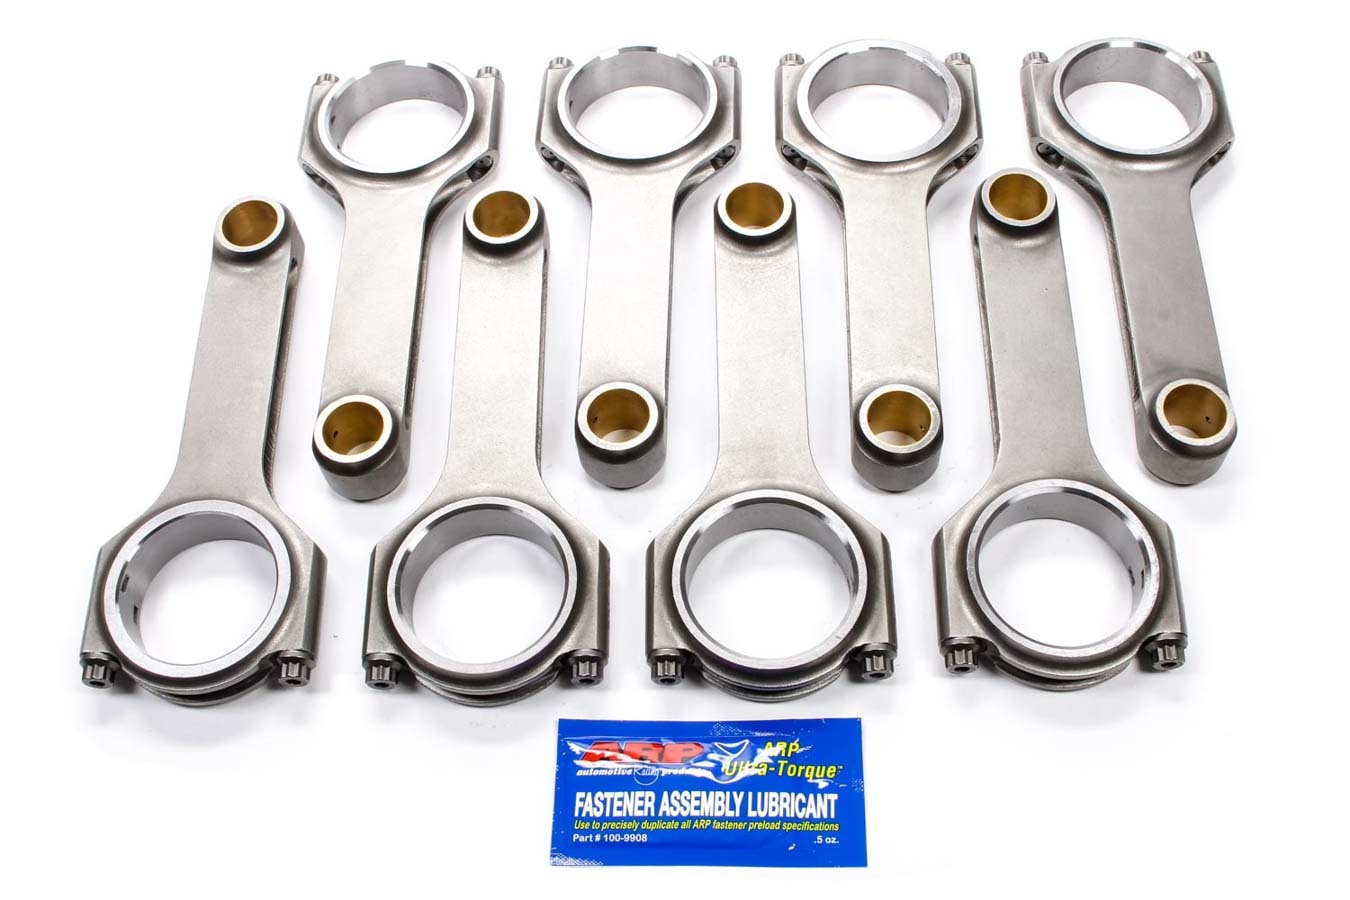 Scat 2-440-6760-2374-990A - Connecting Rod, Pro Sport, H Beam, 6.760 in Long, Bushed, 7/16 in Cap Screws, ARP2000, Forged Steel, Mopar RB-Series, Set of 8